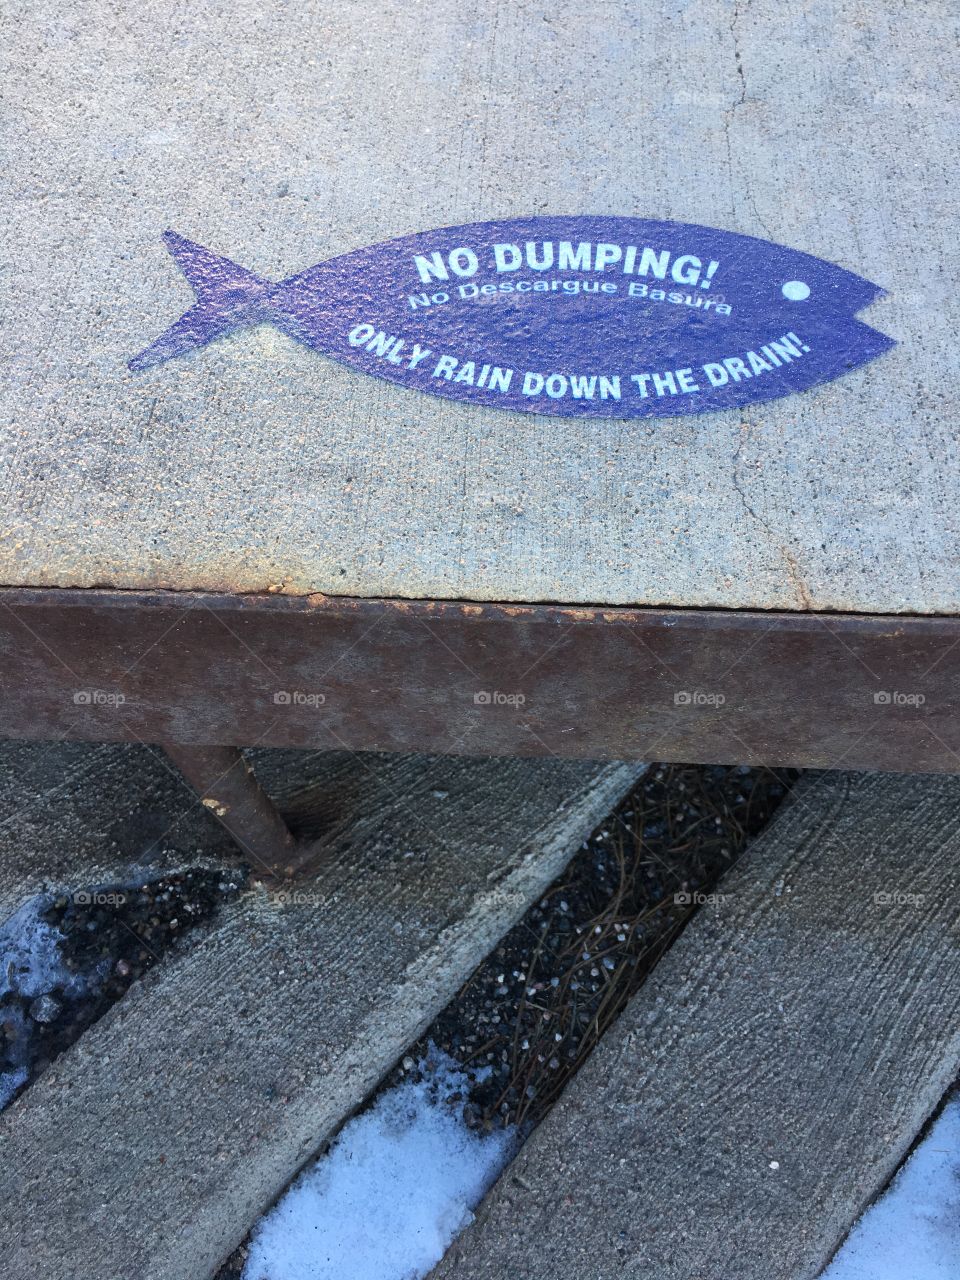 No dumping down the sewer